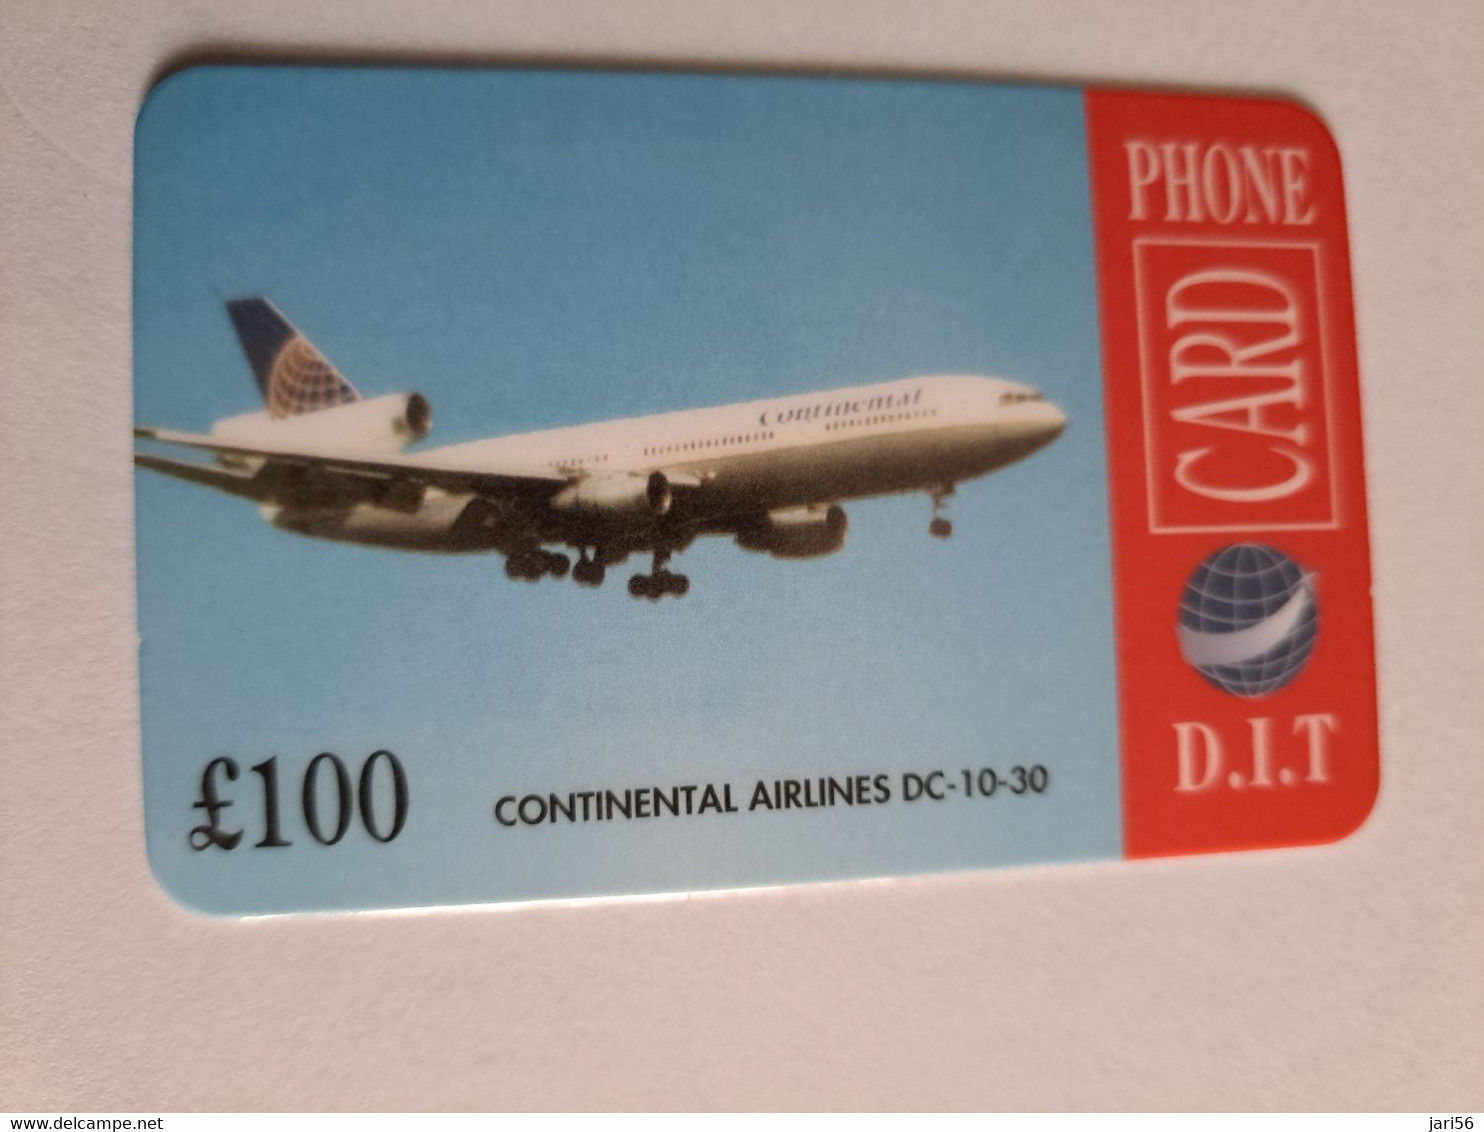 GREAT BRITAIN   100 POUND   / CONTINENTAL AIRLINES DC 10-30   DIT PHONECARD    PREPAID CARD      **12903** - Collections